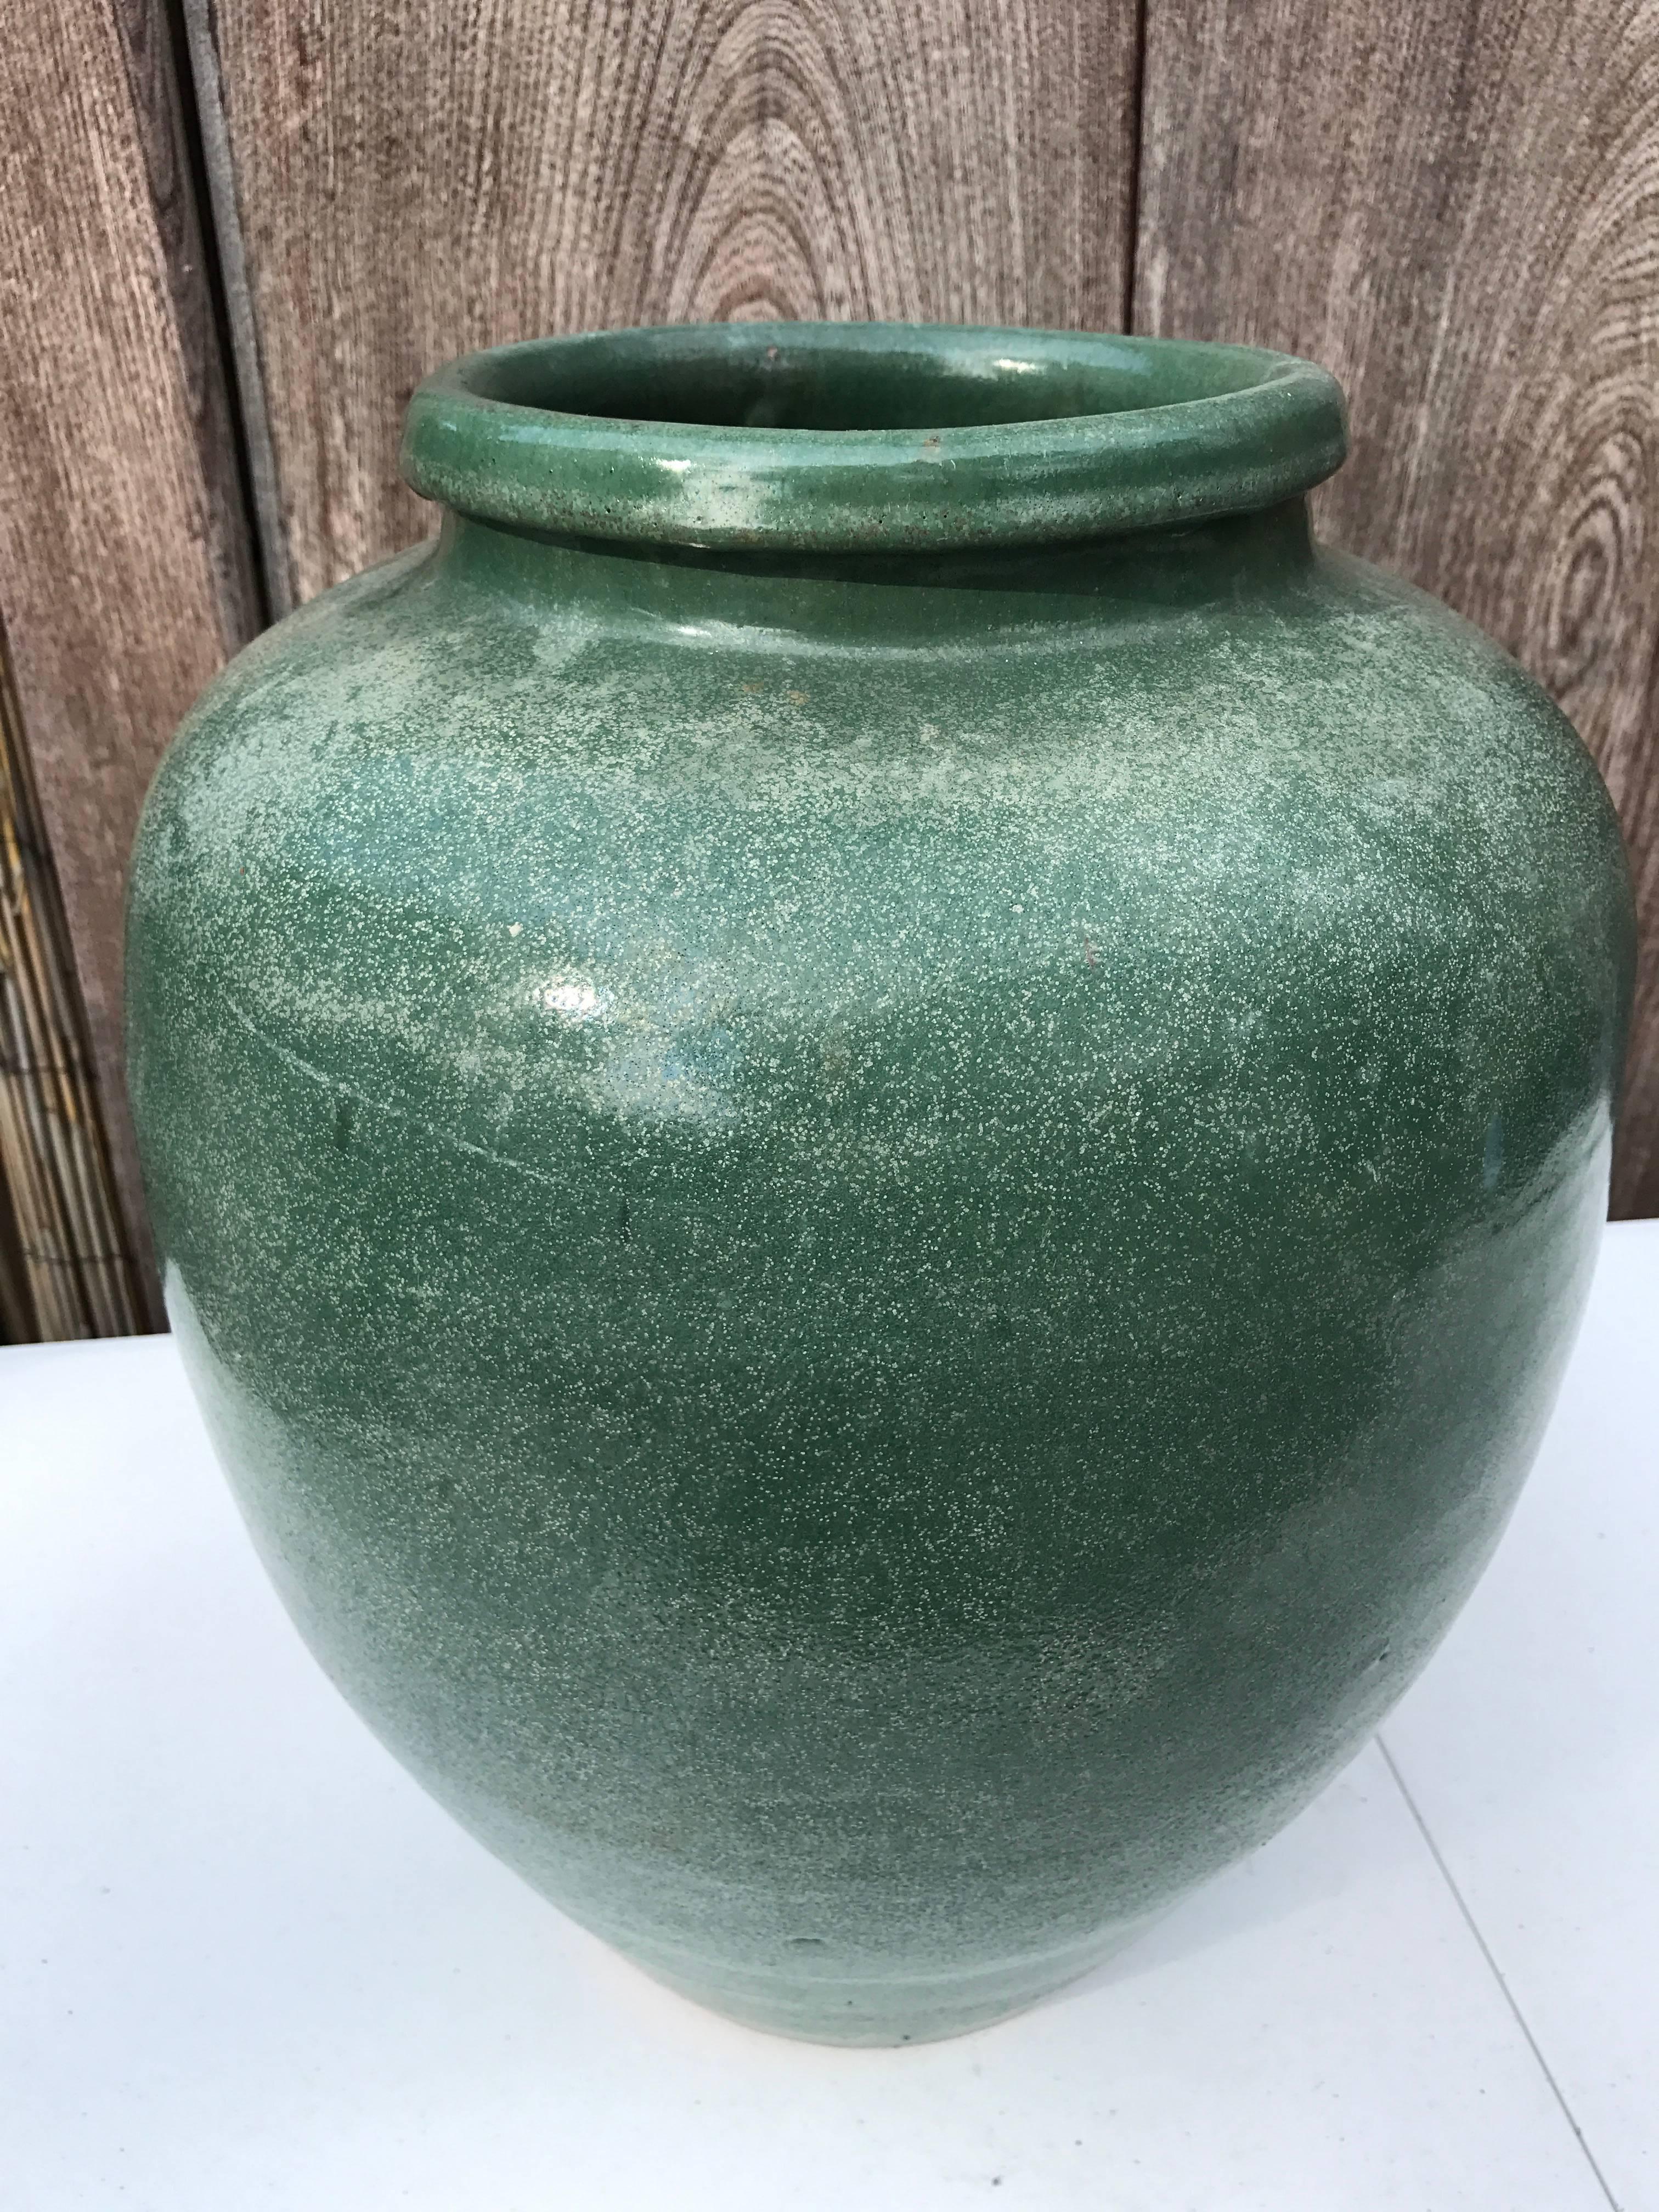 Ceramic Japan Old Handmade Hand-Painted One-of-a-Kind Green Thick Stone Ware Vessel